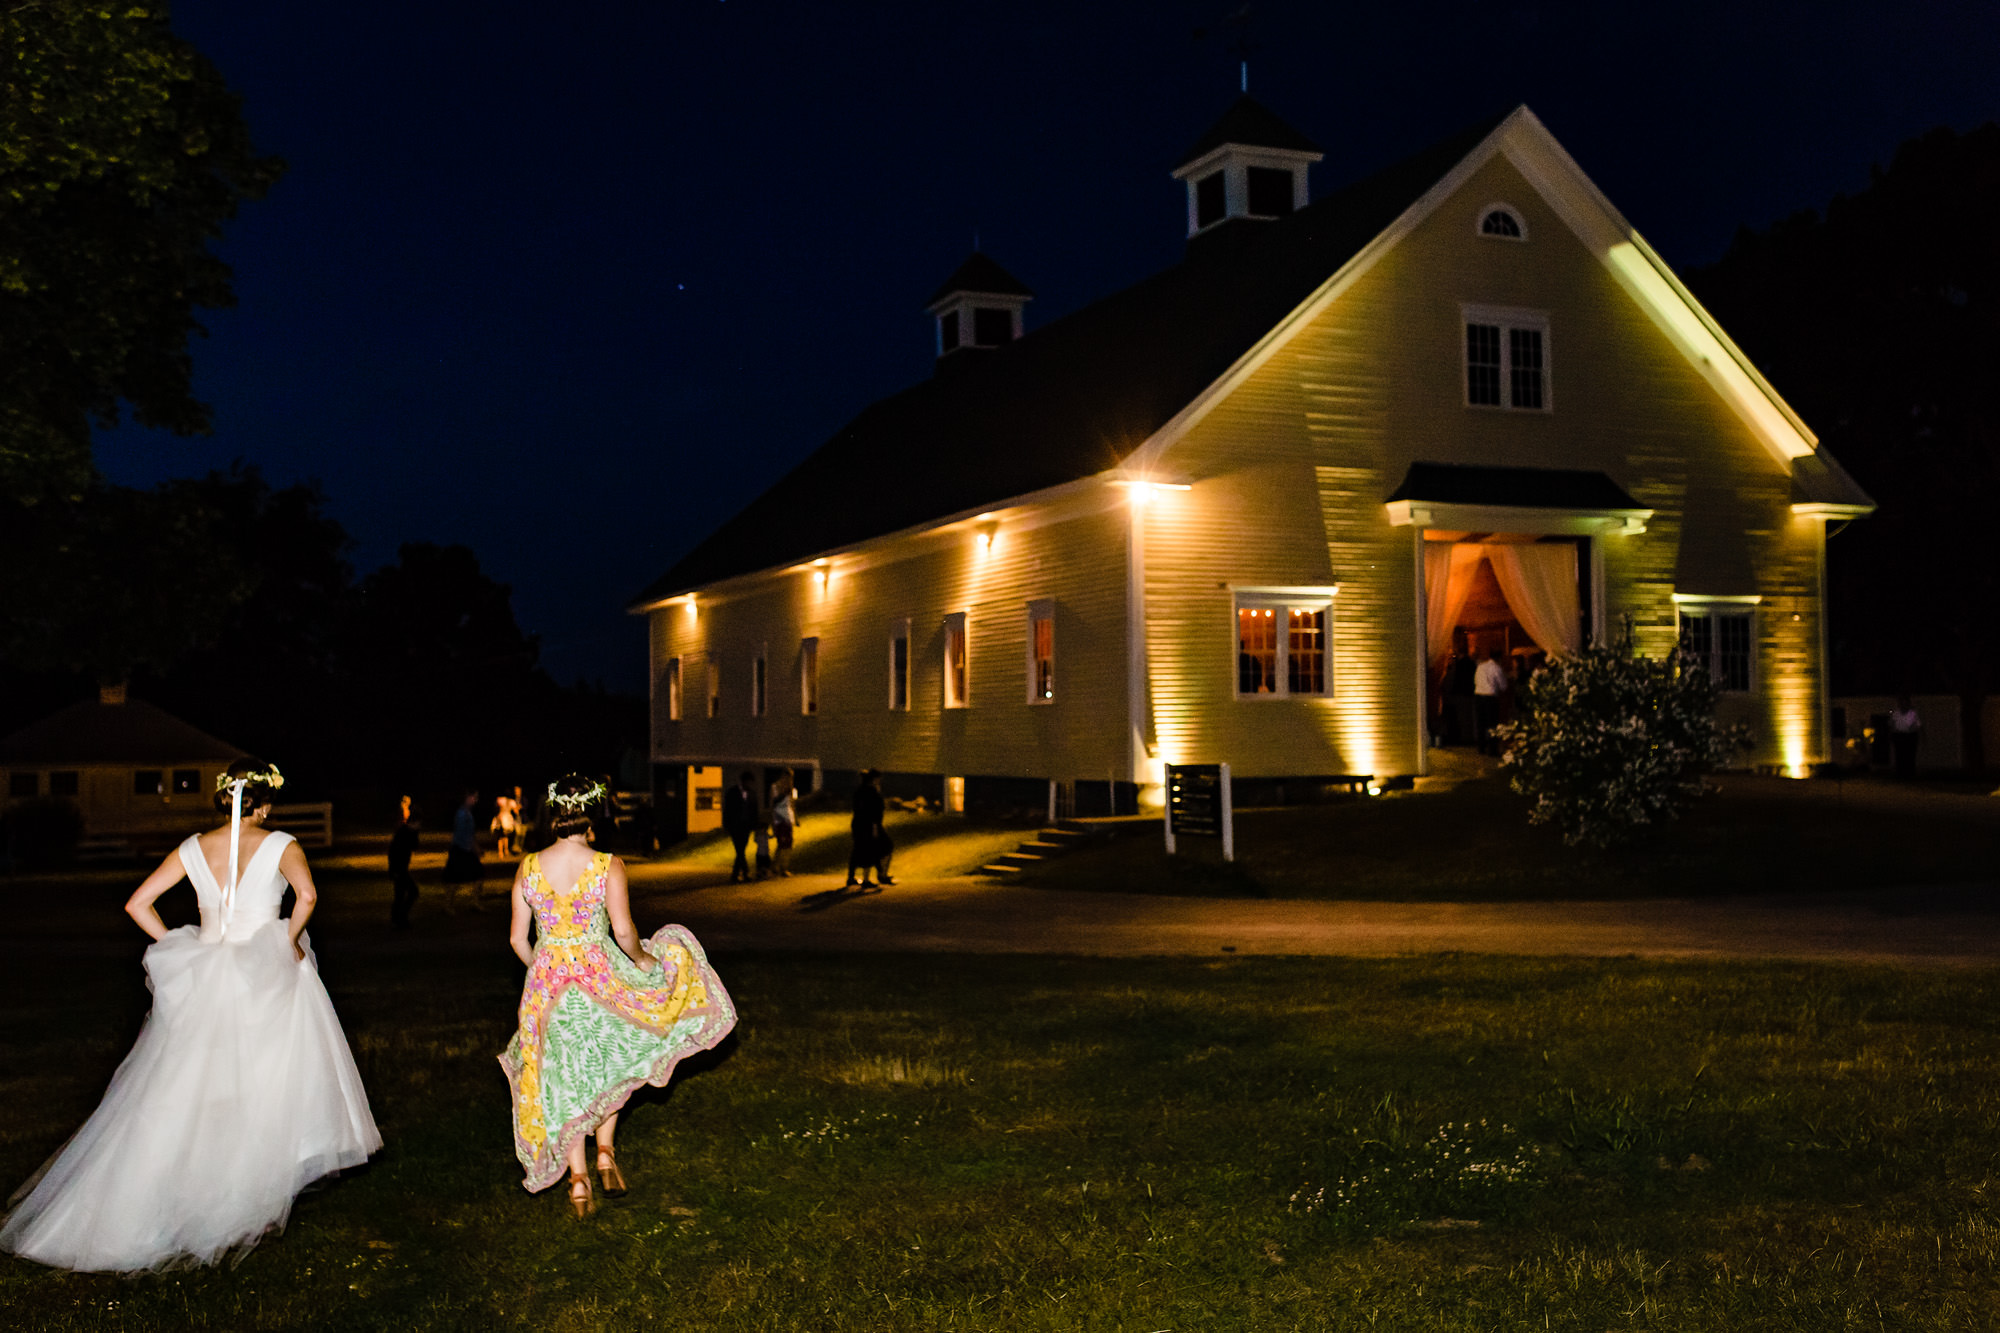 The bride and a friend walk to the barn at Laudholm farm to begin dancing.